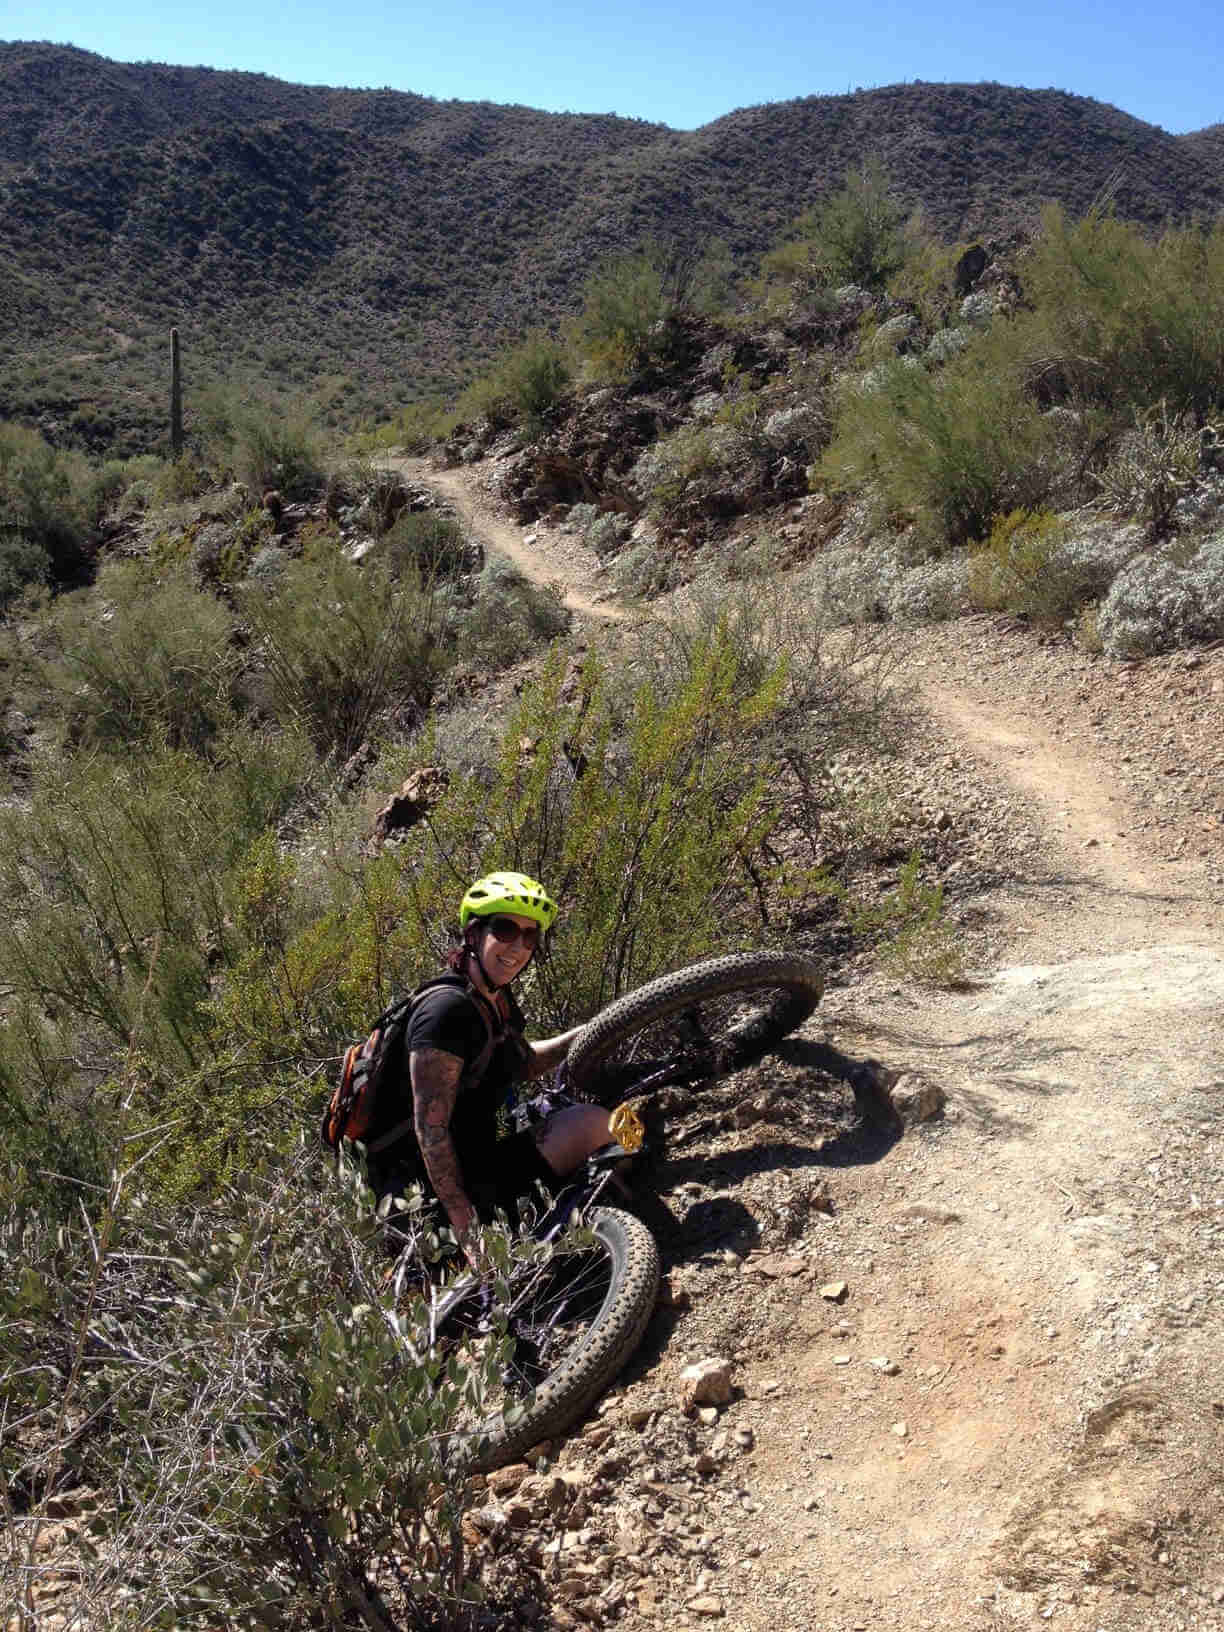 Rear view of a cyclist and their fat bike, laying in the brush on the side of a dirt trail in the desert hills